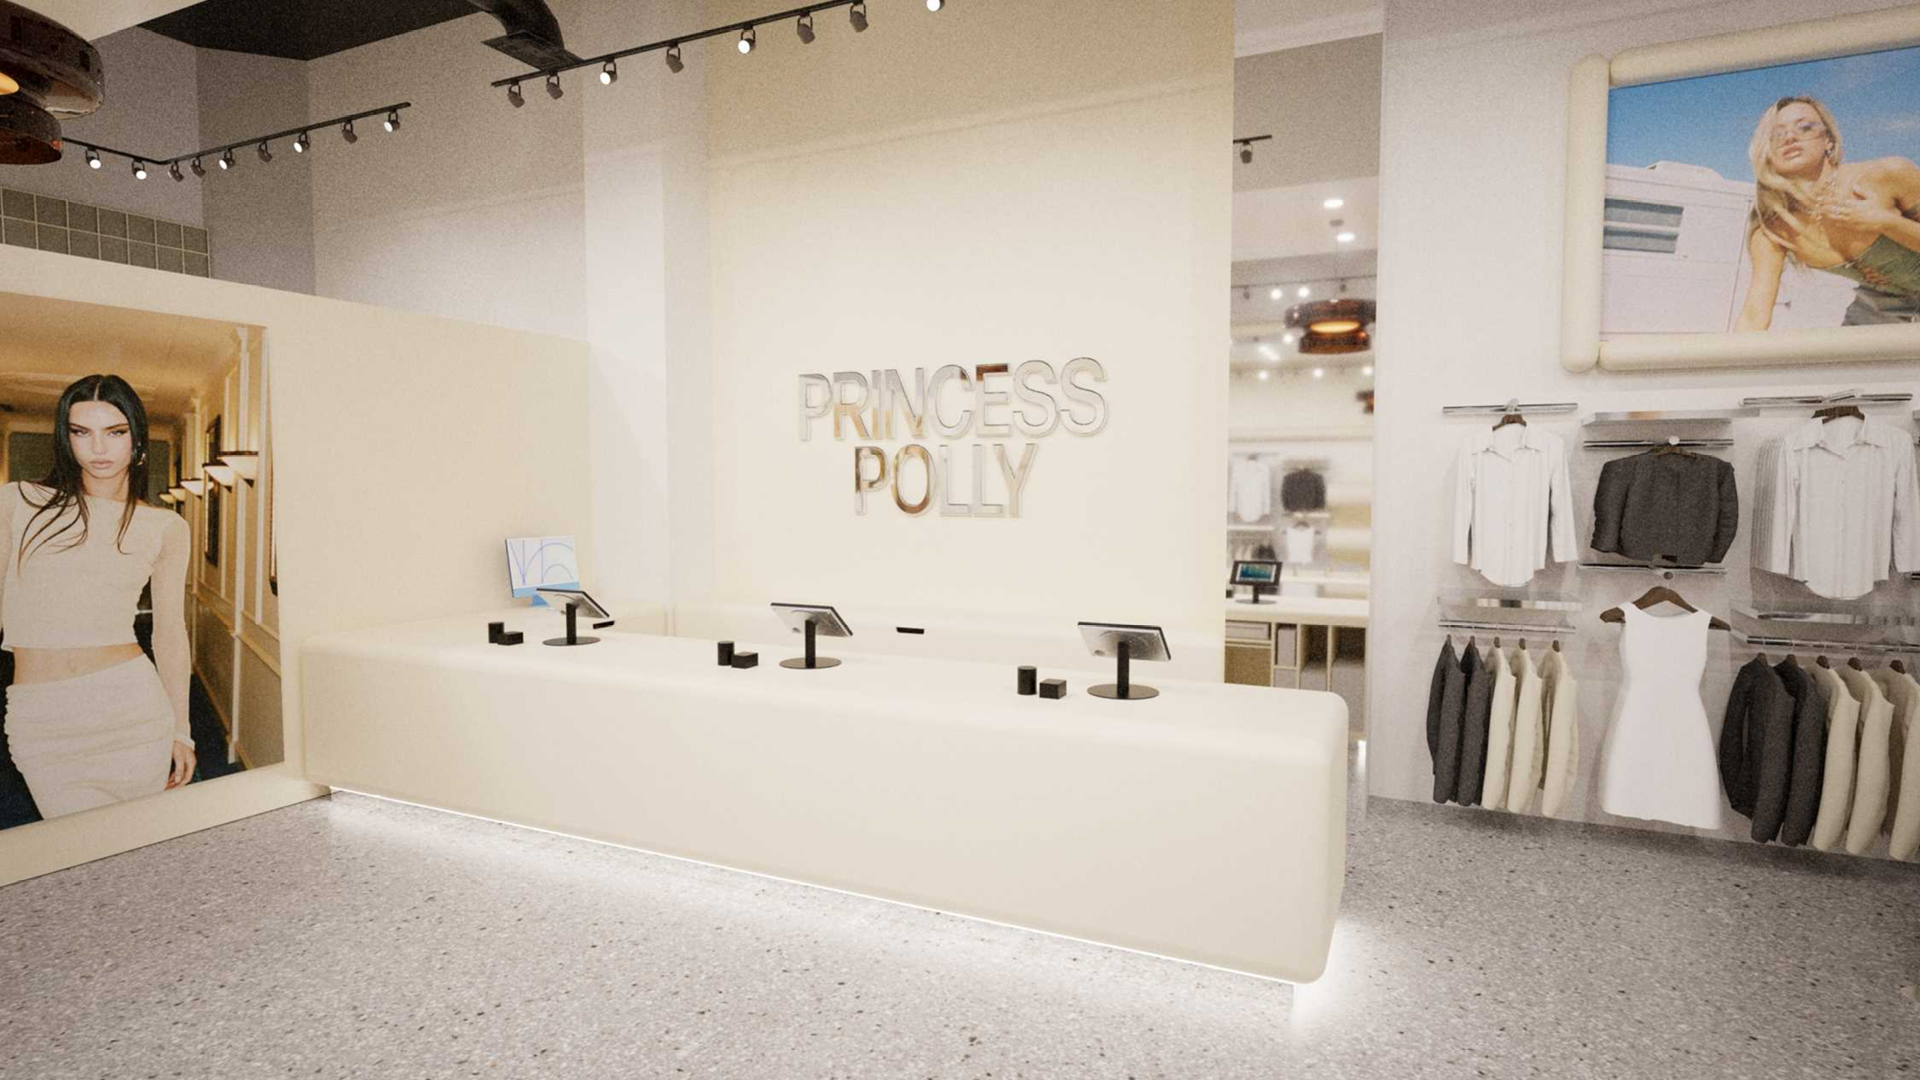 Princess Polly Lands in Los Angeles for First U.S. Store